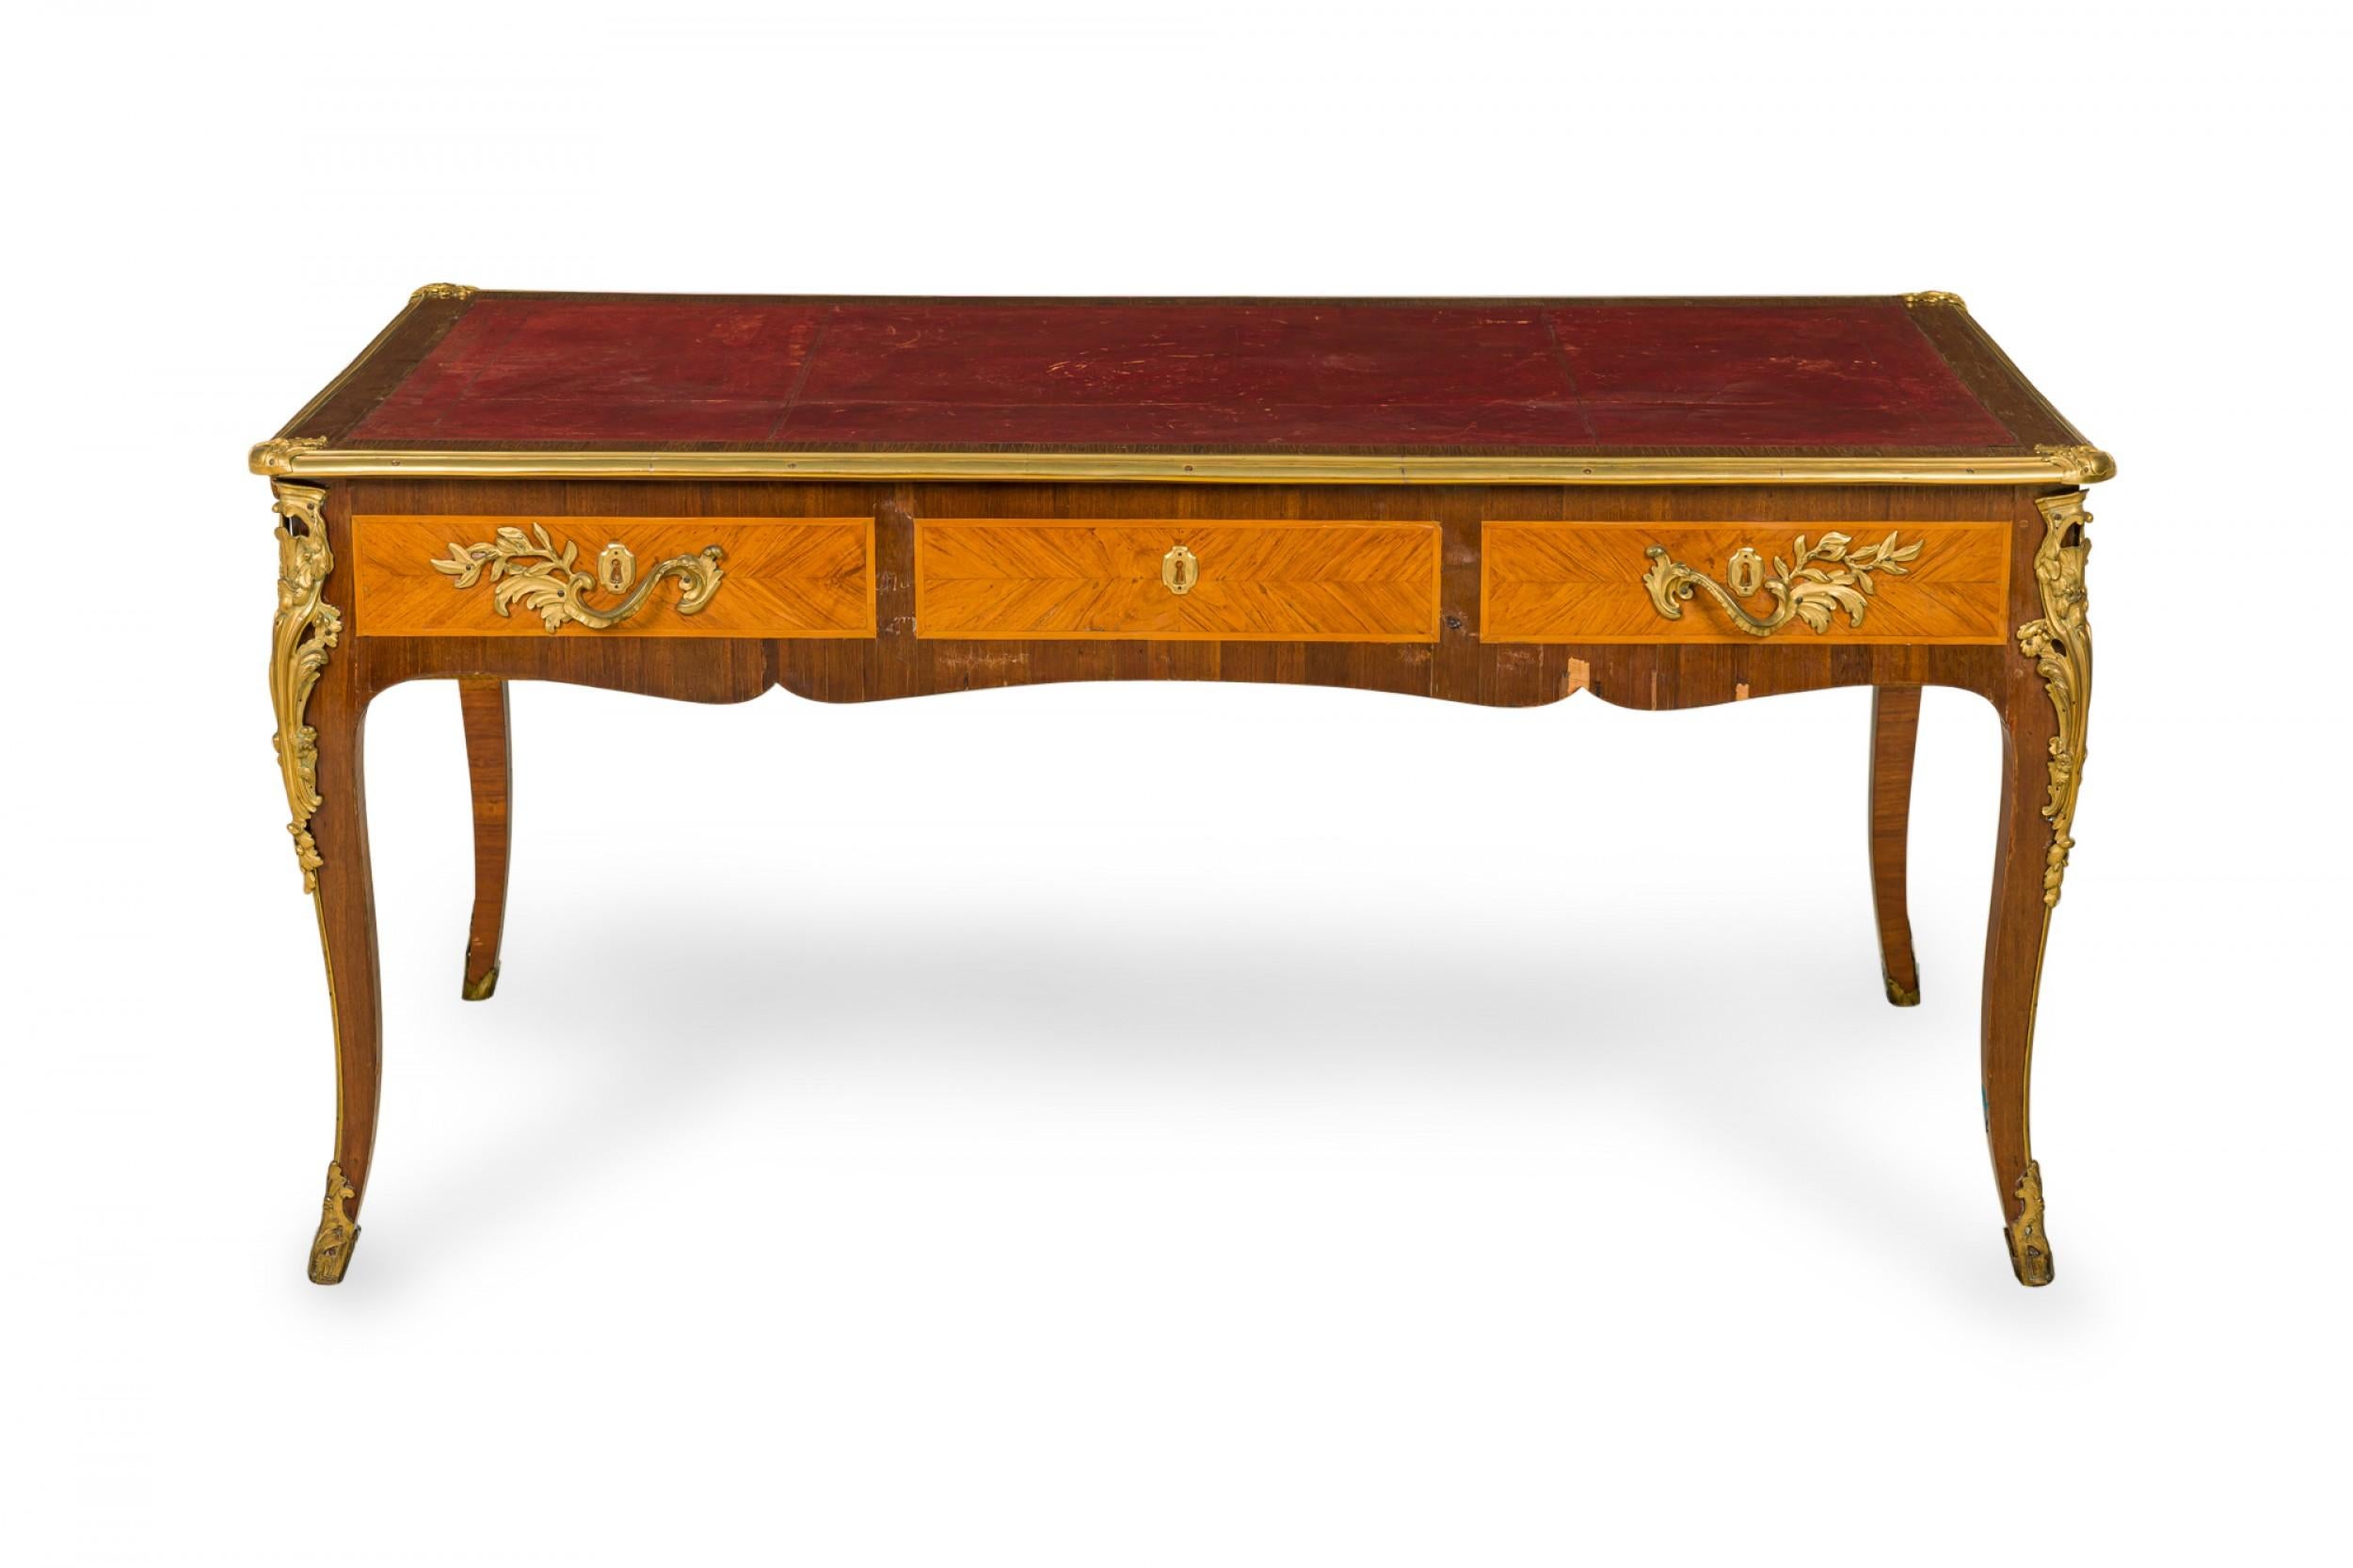 19th Century French Louis XVI Kingwood Veneer, Ormolu, and Red Leather Writing Desk For Sale